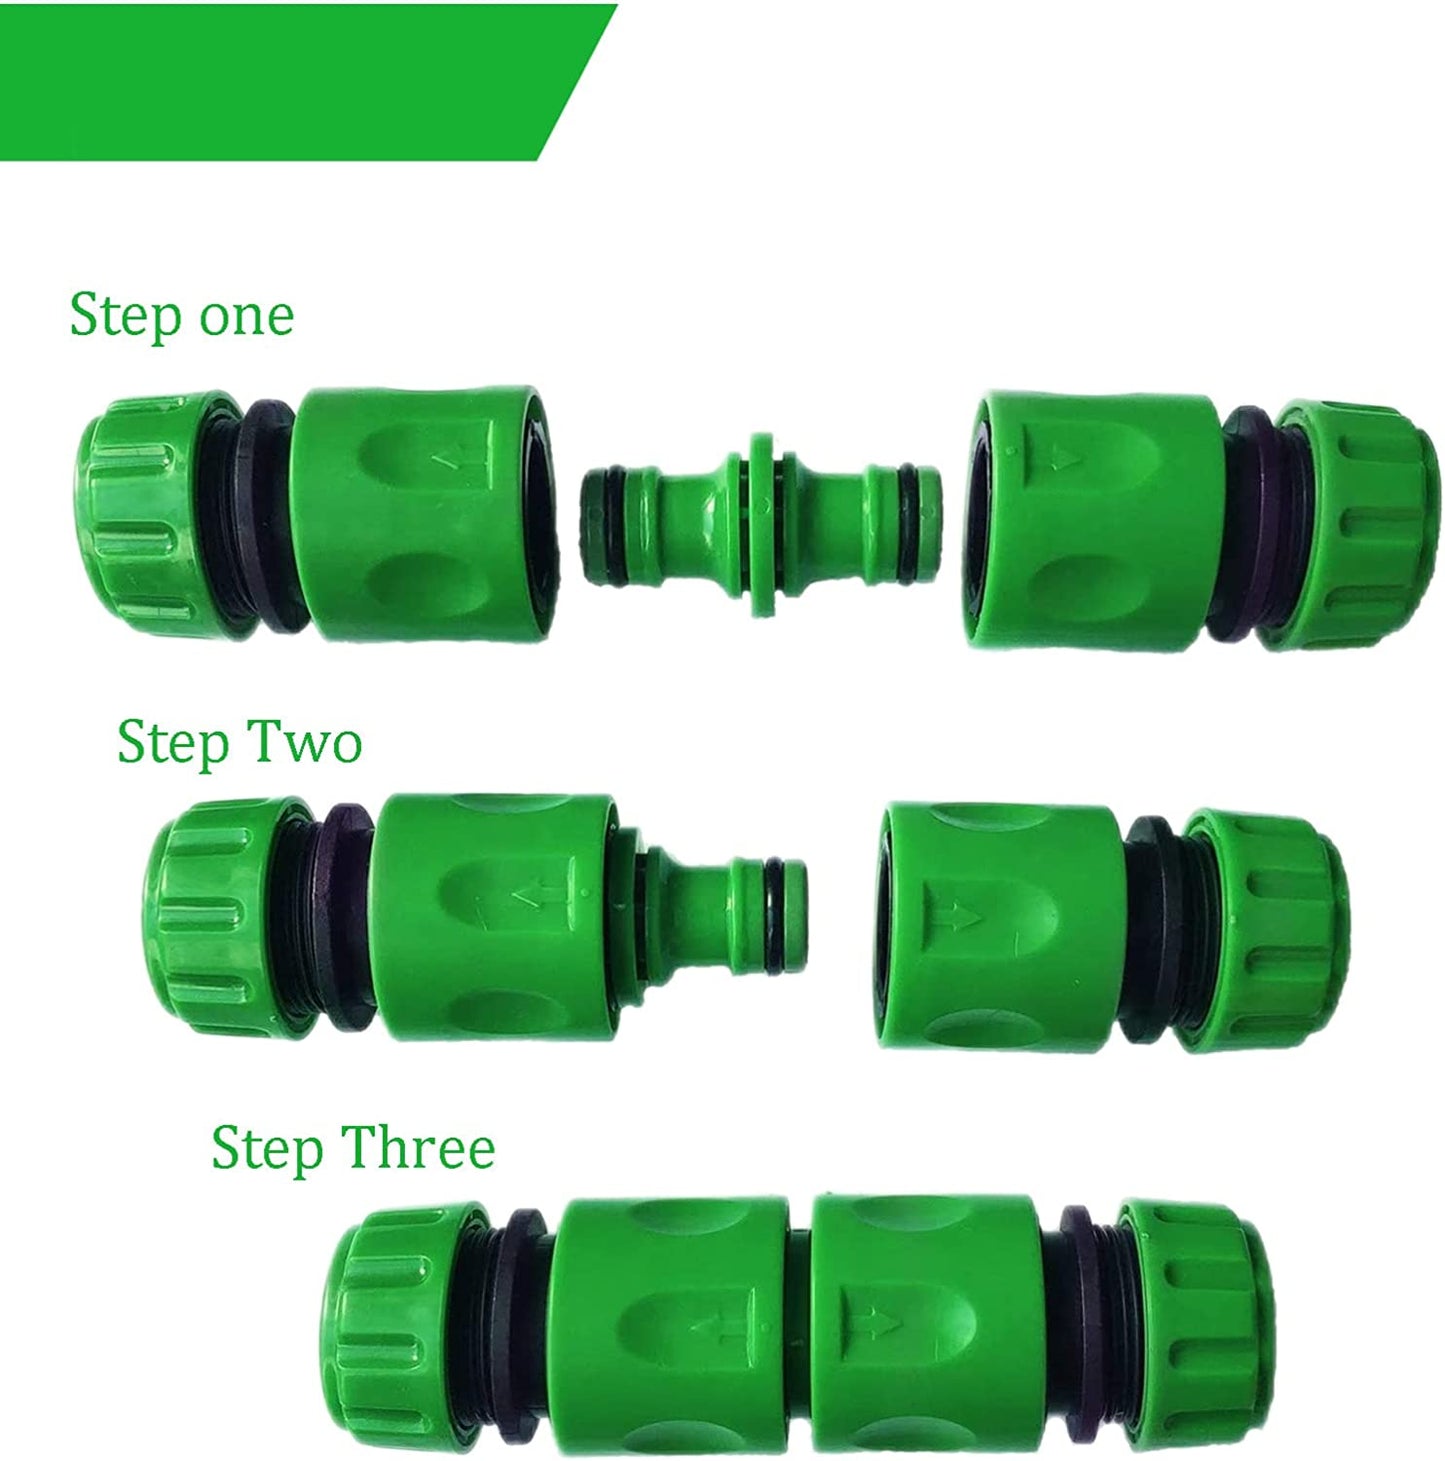 10Pack Garden Hose Tap Connector Hose Pipe Fittings Kit for Outdoor Tap&Join Hose Pipe Tube(2 Double Male Snap Connector,6 Hose End Quick Connector,2 Hose Tap Connector 1/2 Inch &3/4 Inch Size 2-In-1)